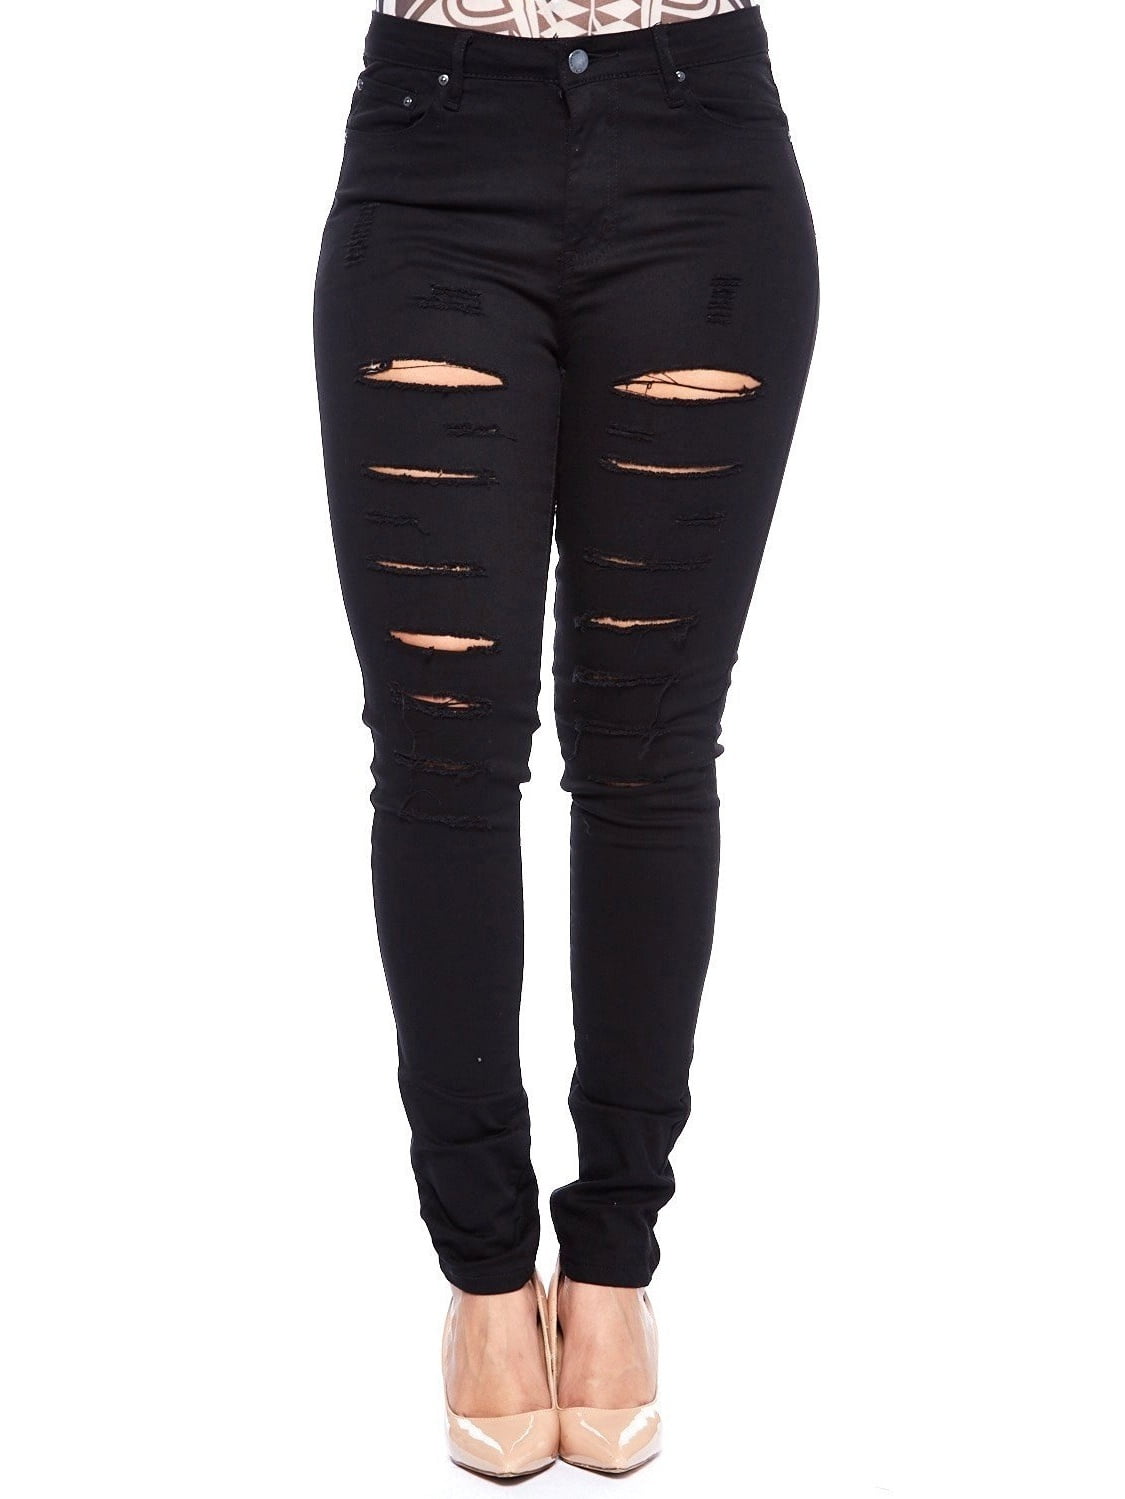 ripped black plus size jeans